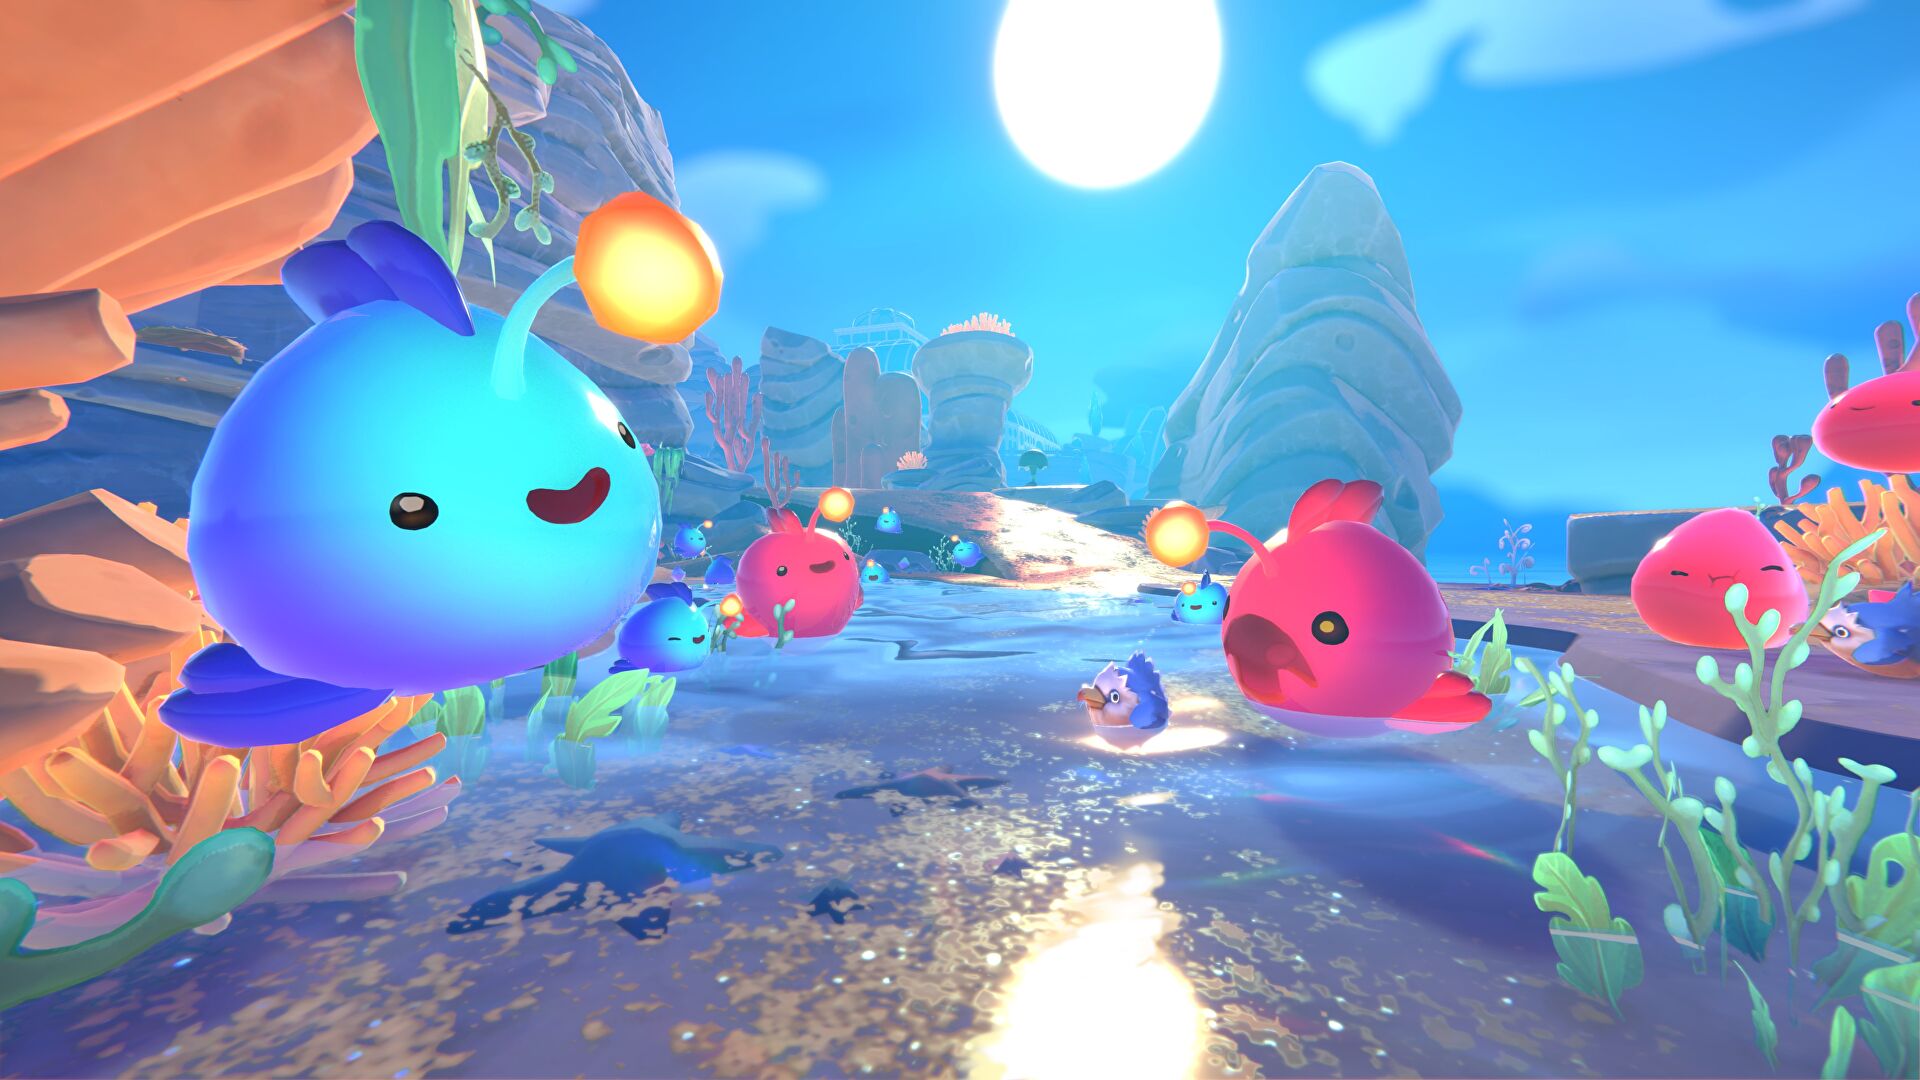 Slime Rancher 2 will poop onto early access next month